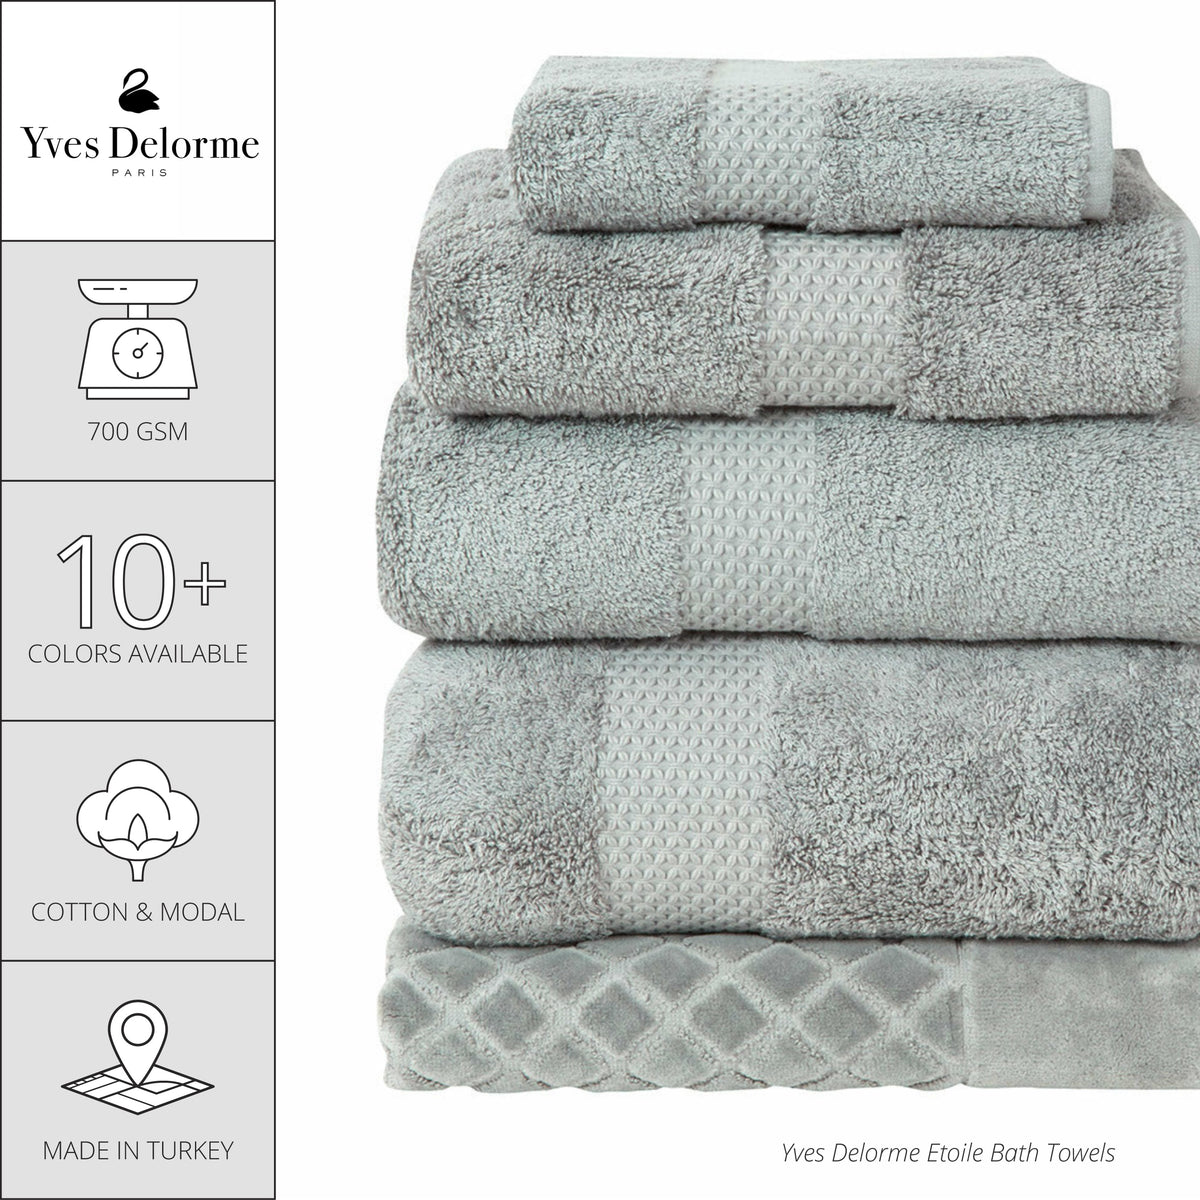 Yves Delorme Etoile Bath Towels and Mats - Sienna